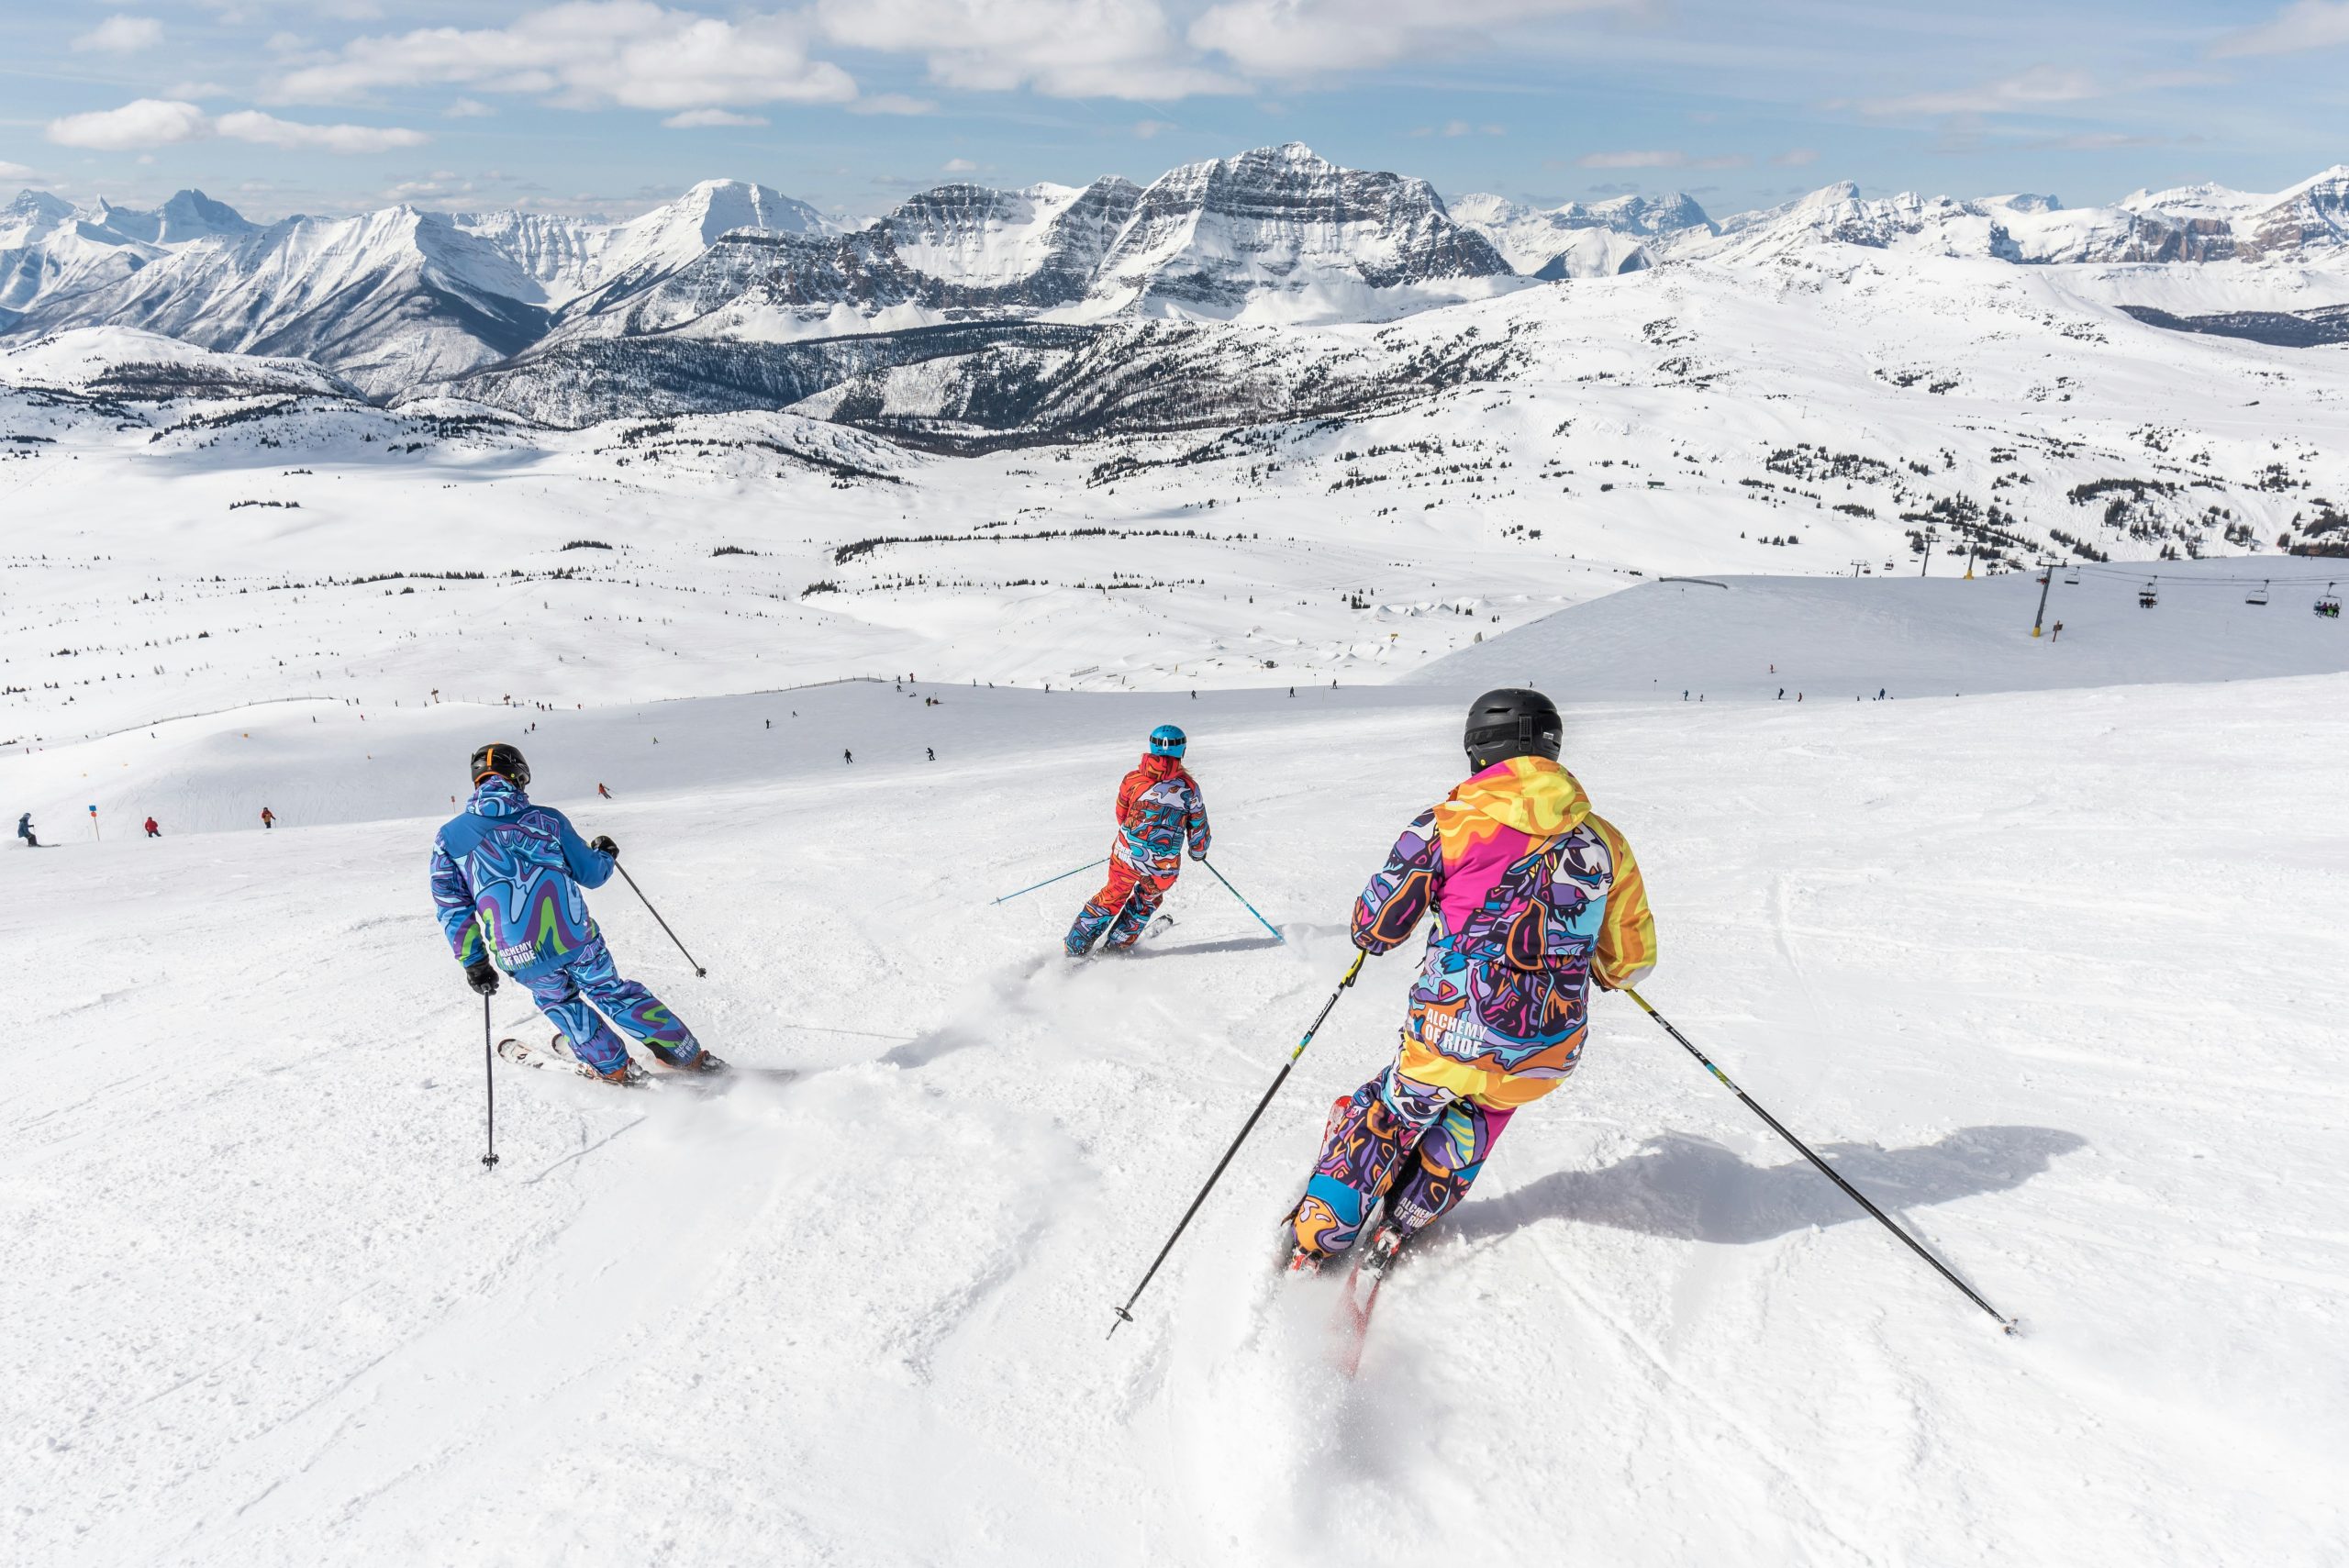 discover the thrill of skiing with our expert tips and guides. find the best slopes and equipment for your next adventure.